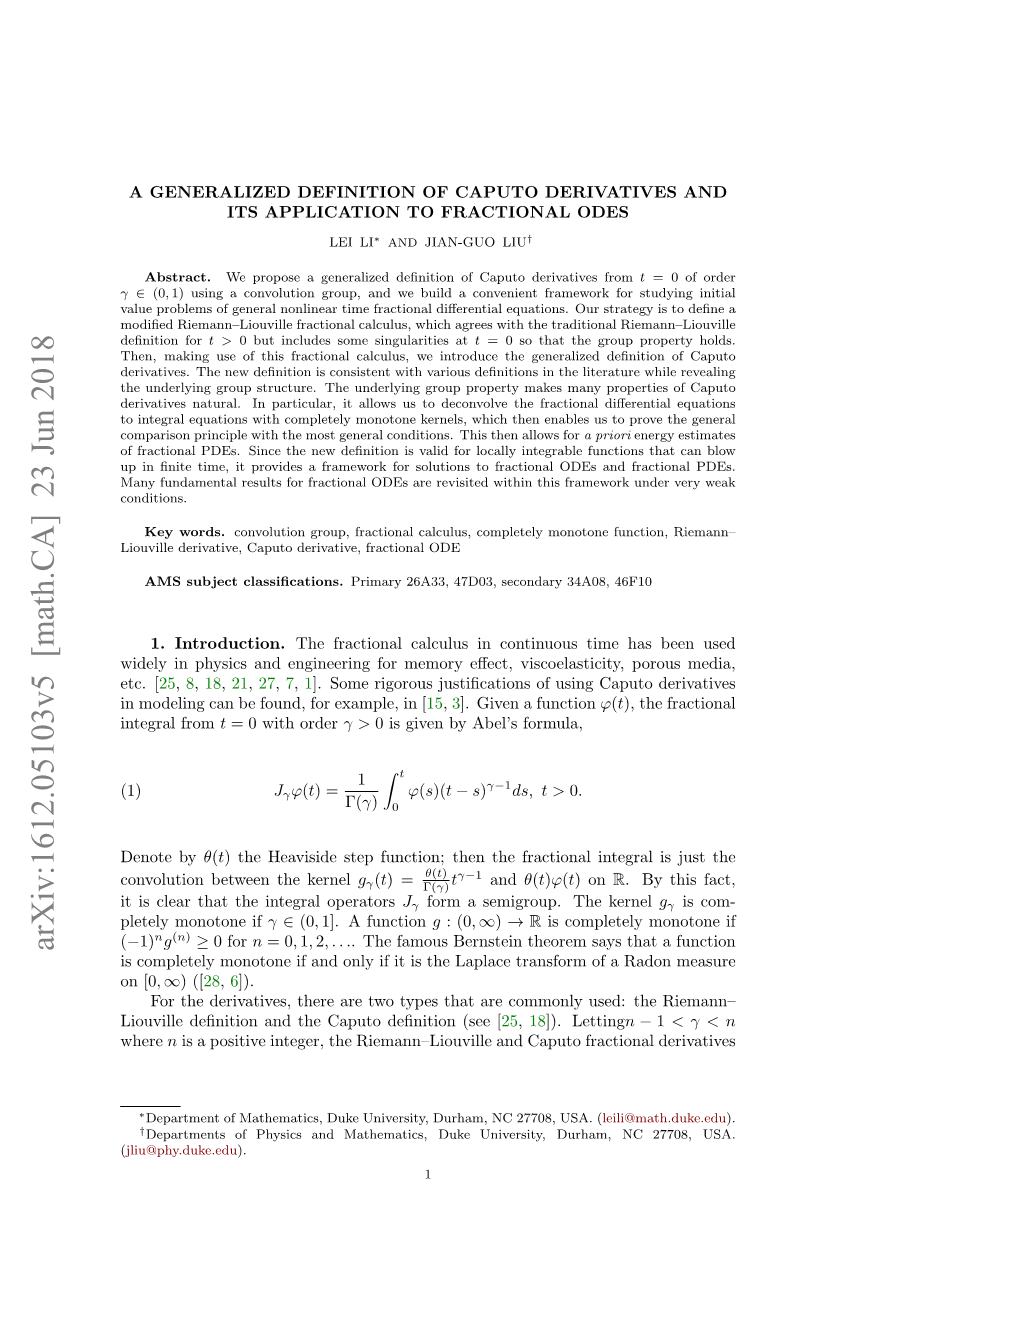 Arxiv:1612.05103V5 [Math.CA] 23 Jun 2018 Is− Completely≥ Monotone If and Only If It Is the Laplace Transform of a Radon Measure on [0, ) ([28,6])